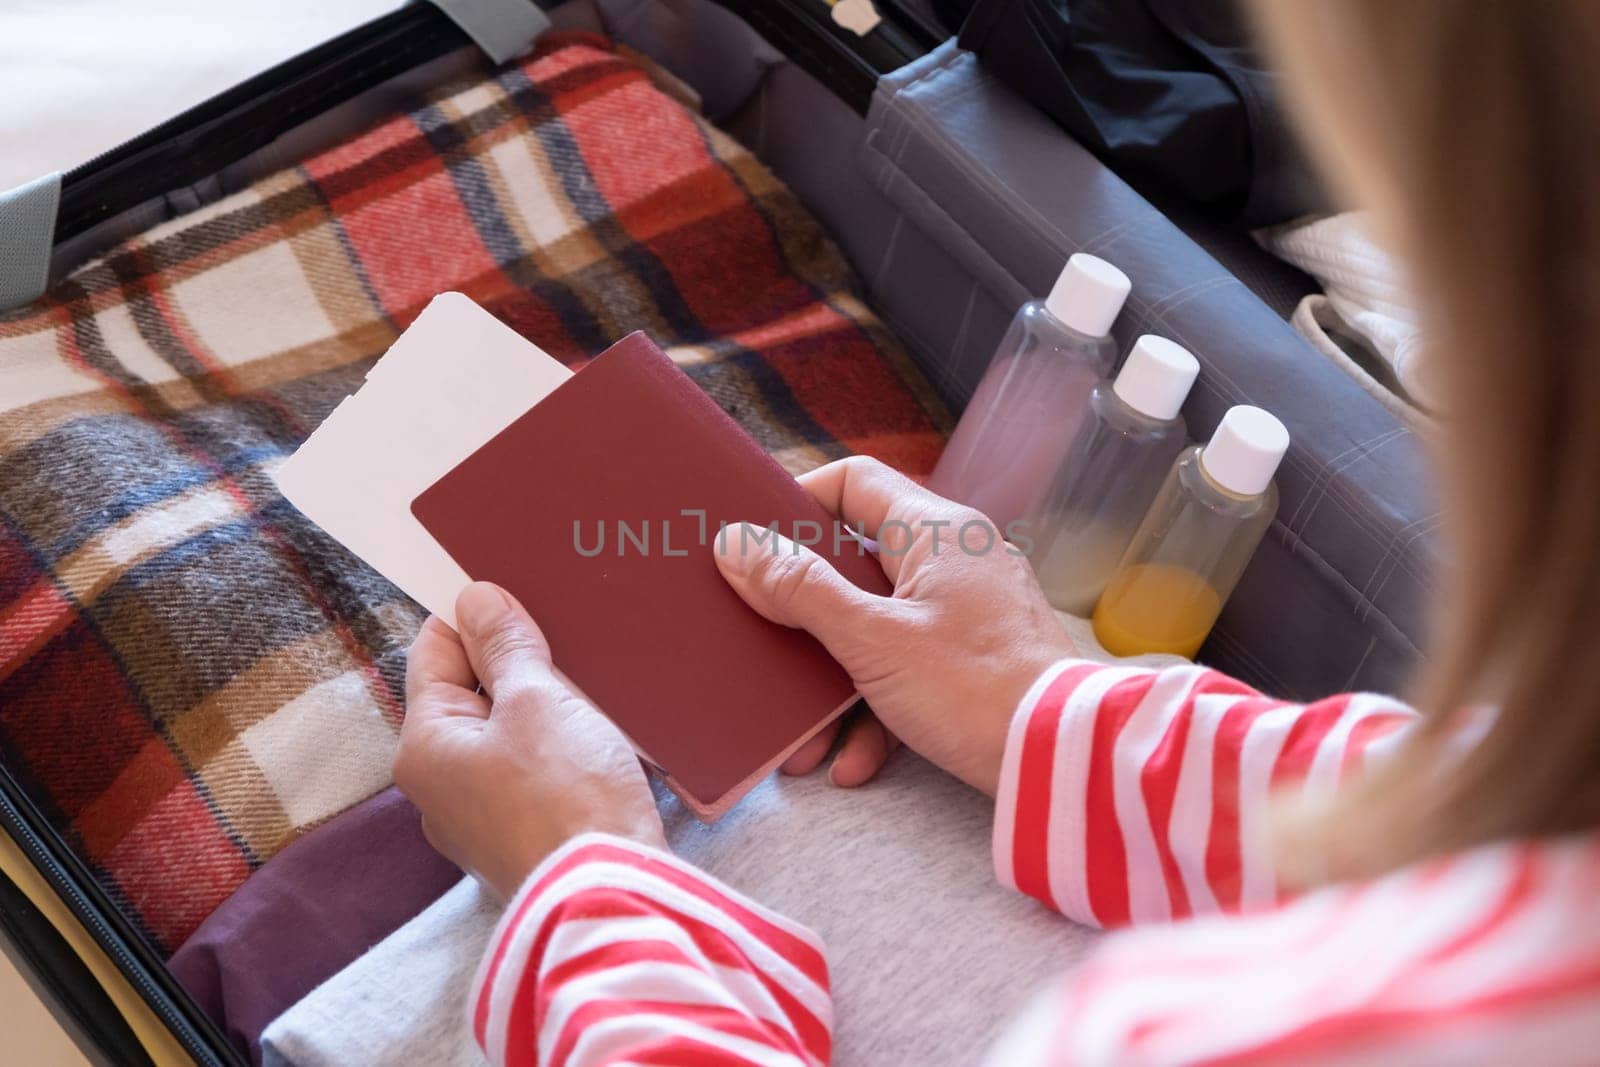 happy woman preparing for holidays, packing suitcase on bed